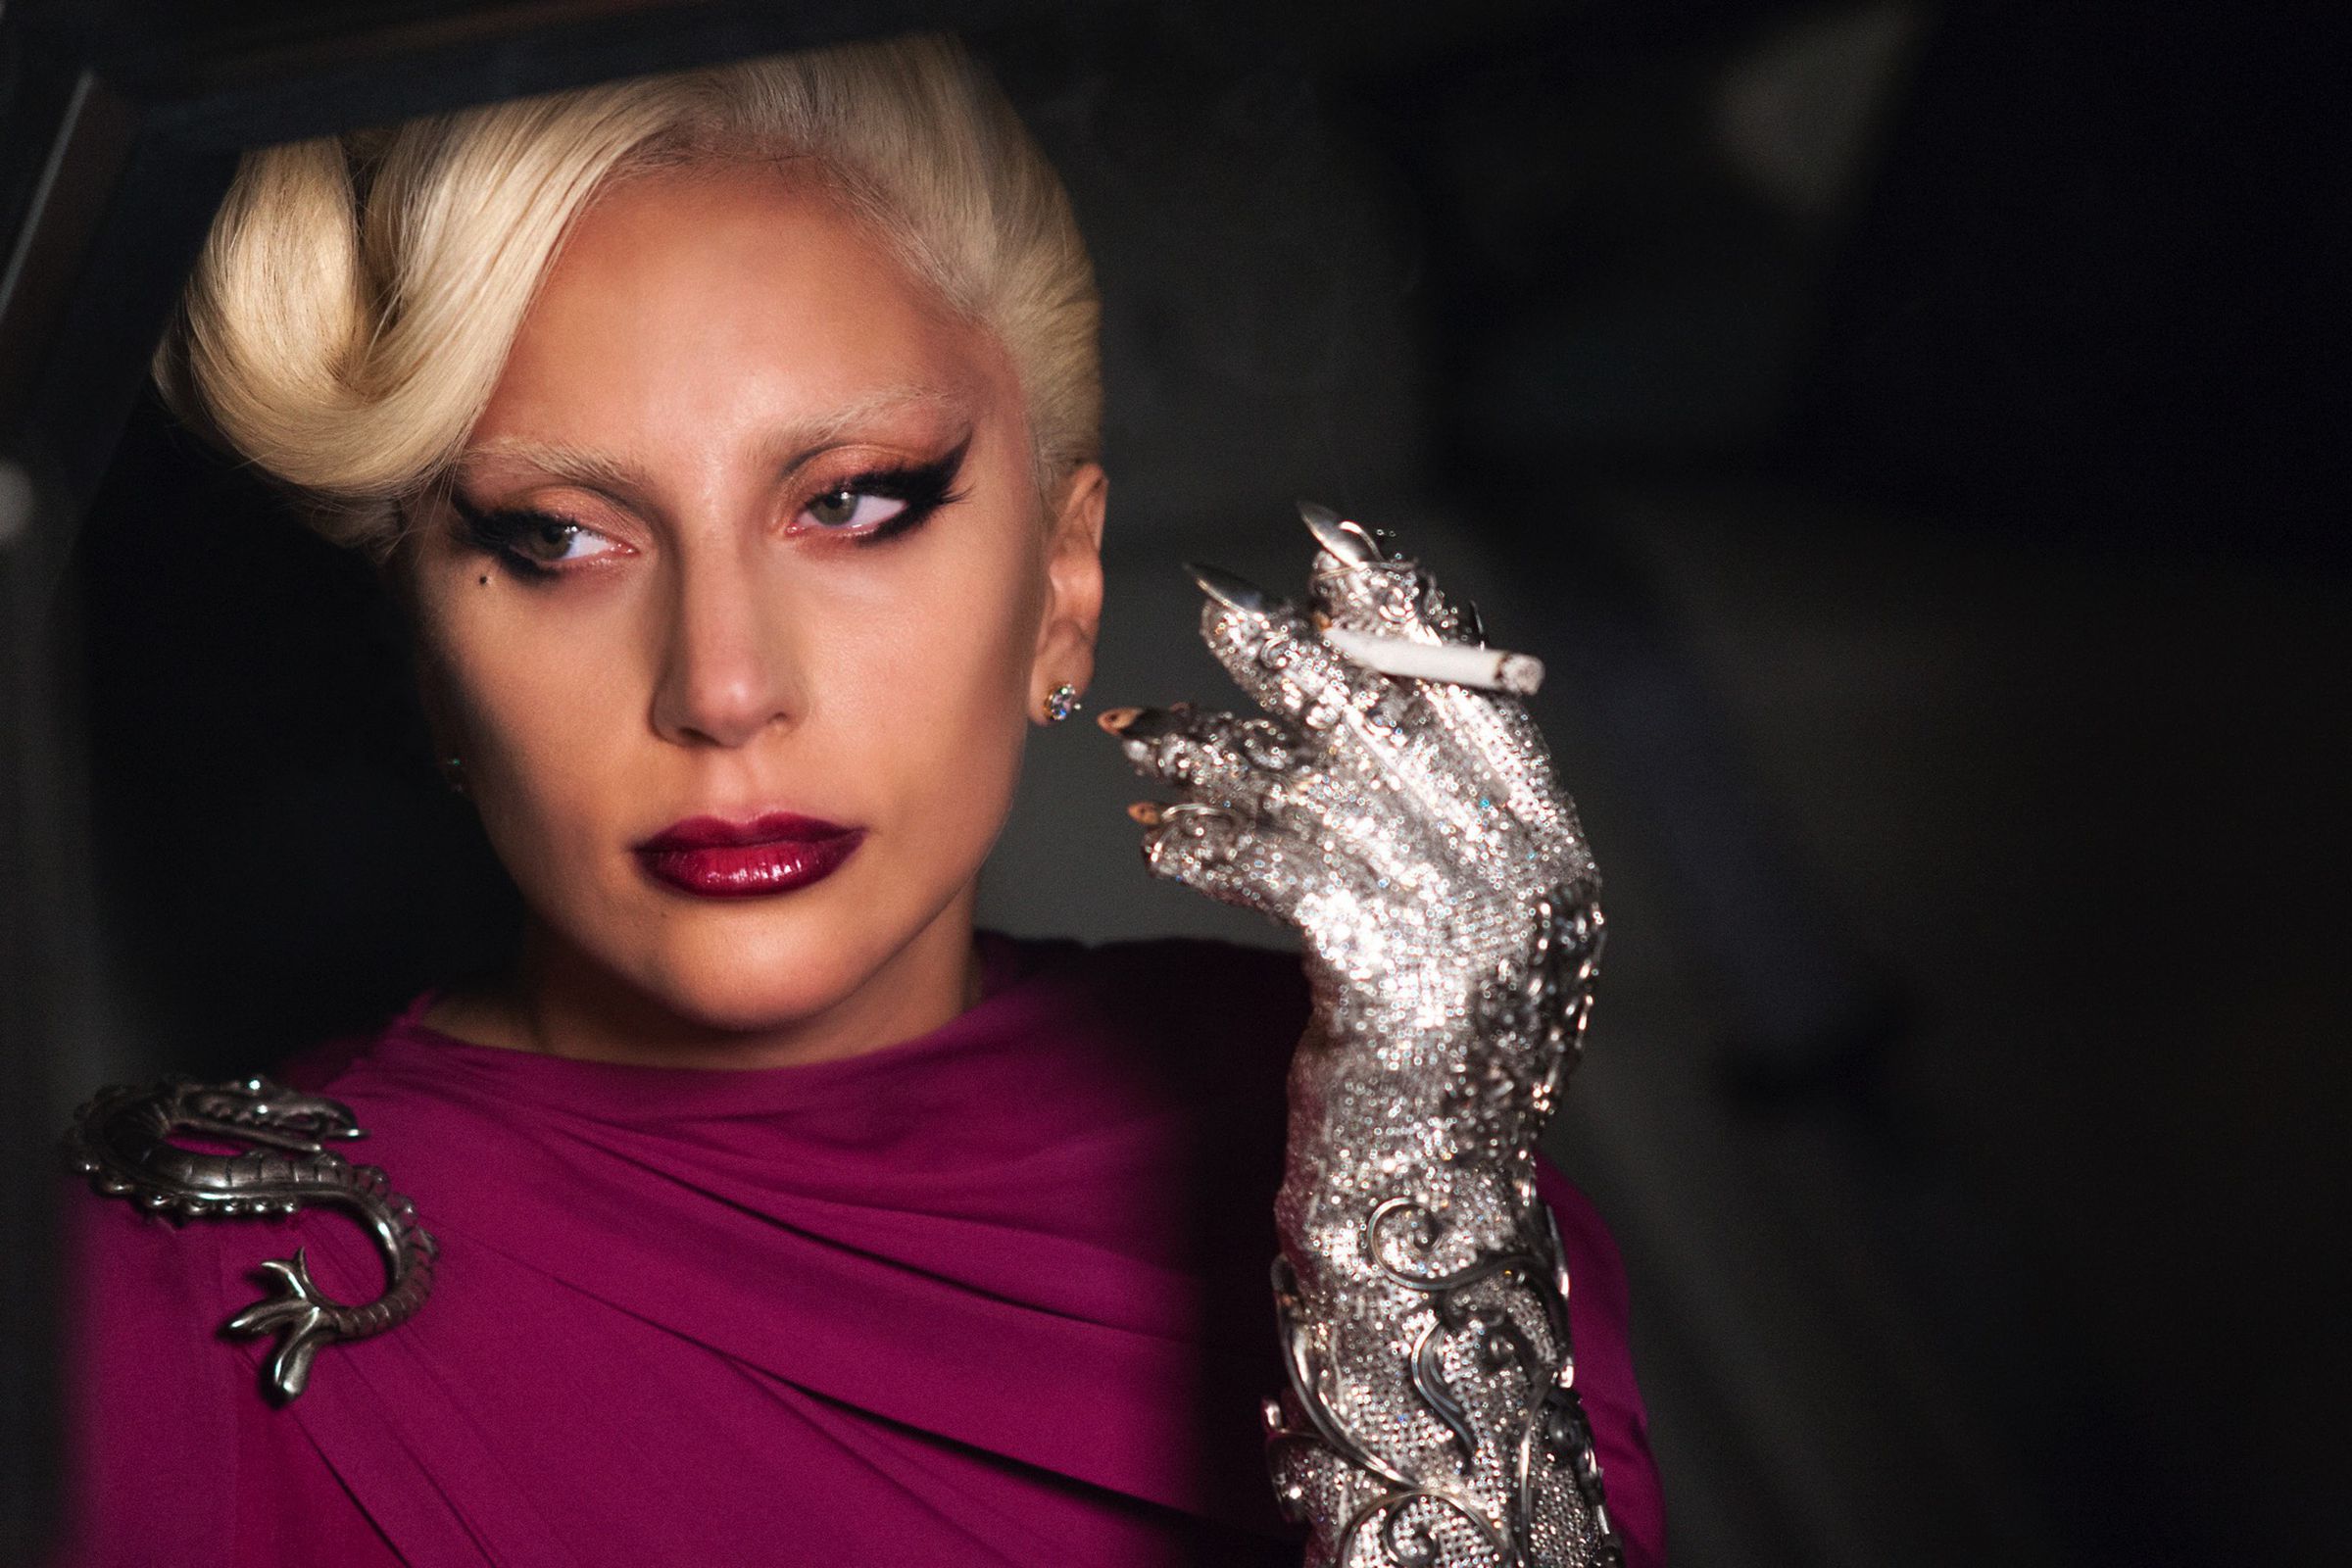 American Horror Story: Hotel promotional images (FX)